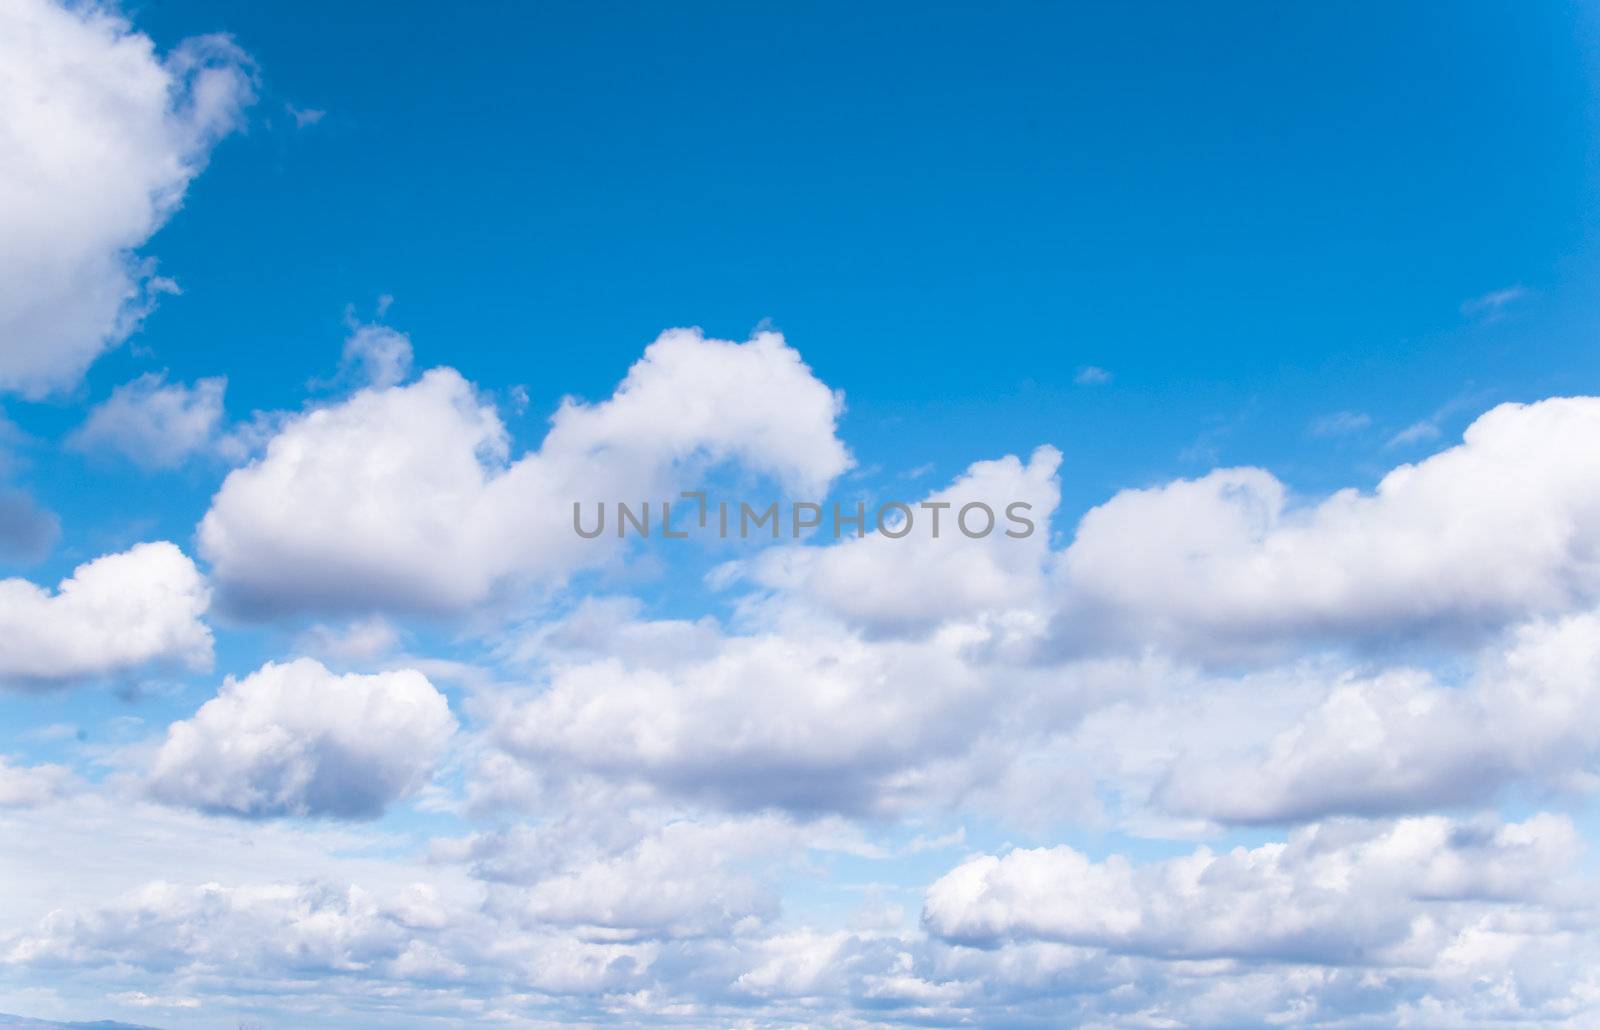 Clouds by photo4dreams